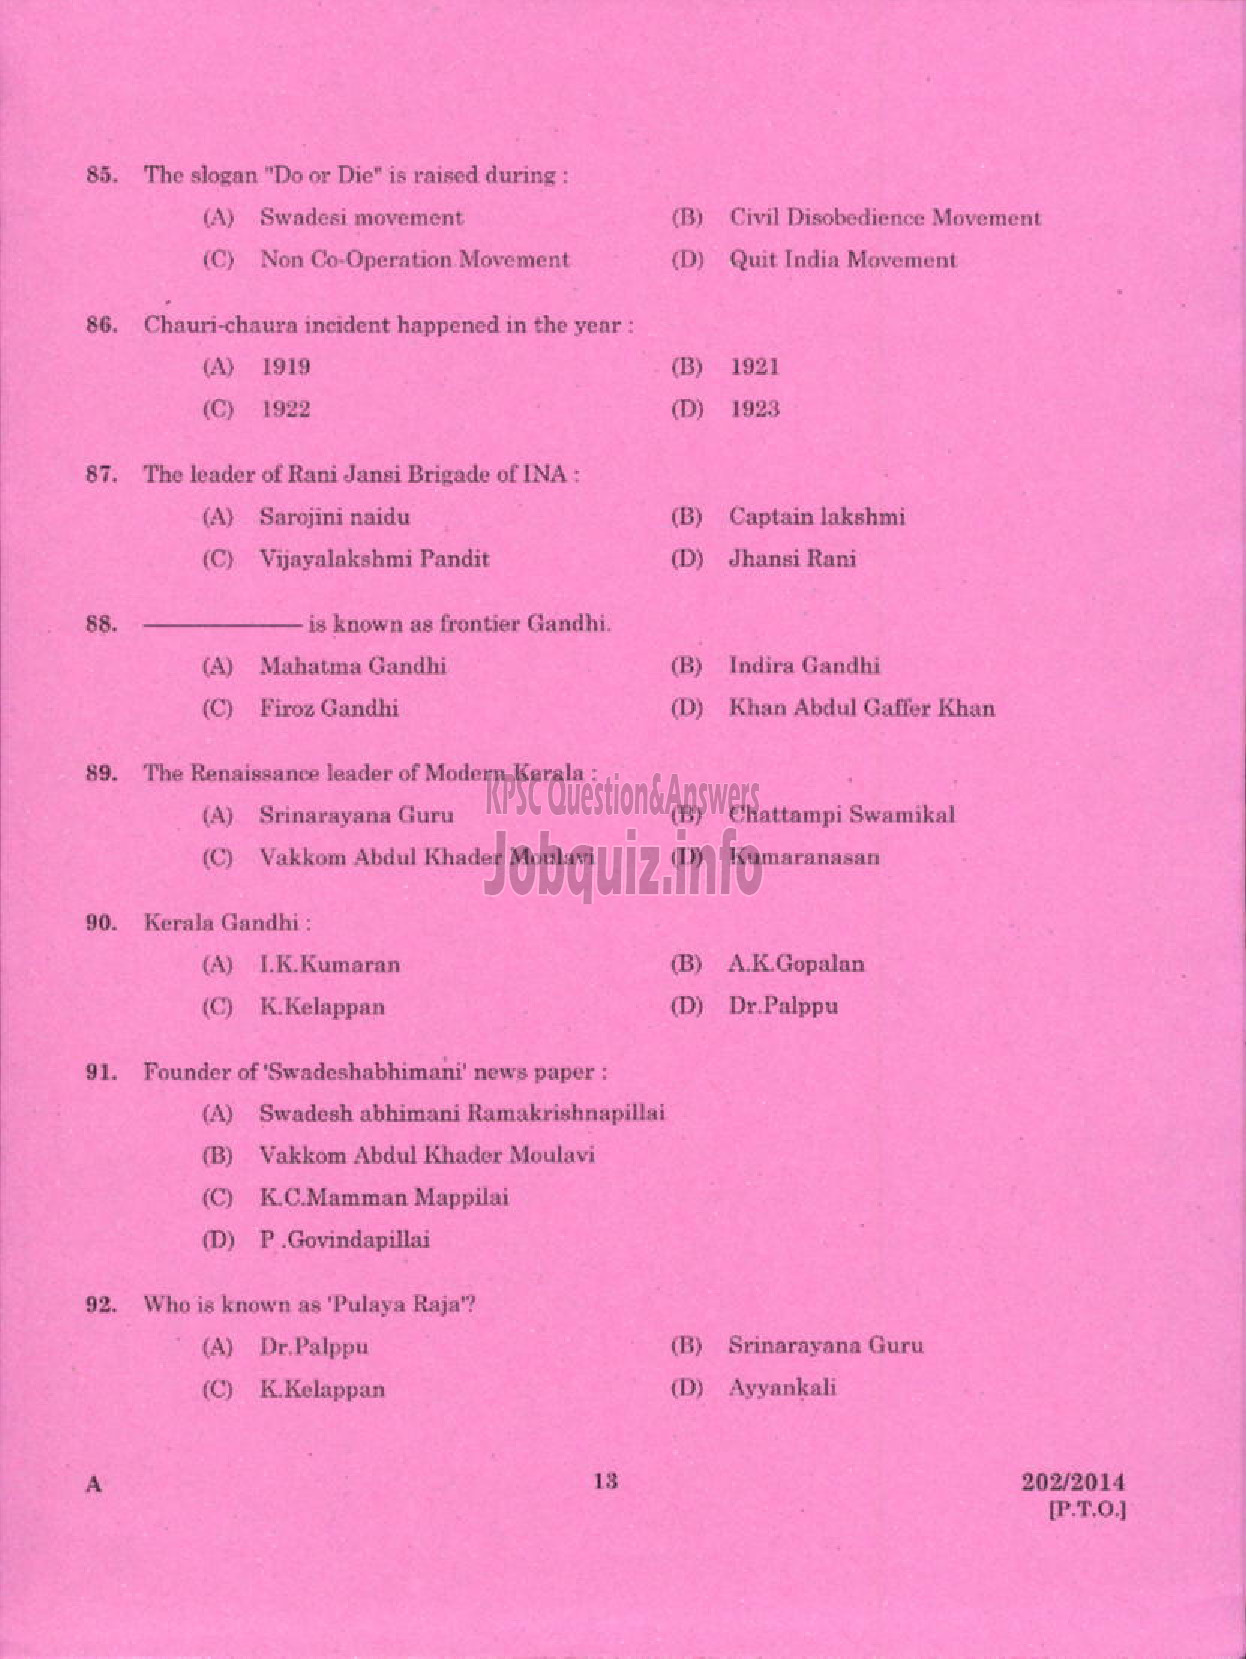 Kerala PSC Question Paper - TRADESMAN SHEET METAL ENGINEERING TECHNICAL EDUCATION TVM PTA IDK WYD AND KGD-11